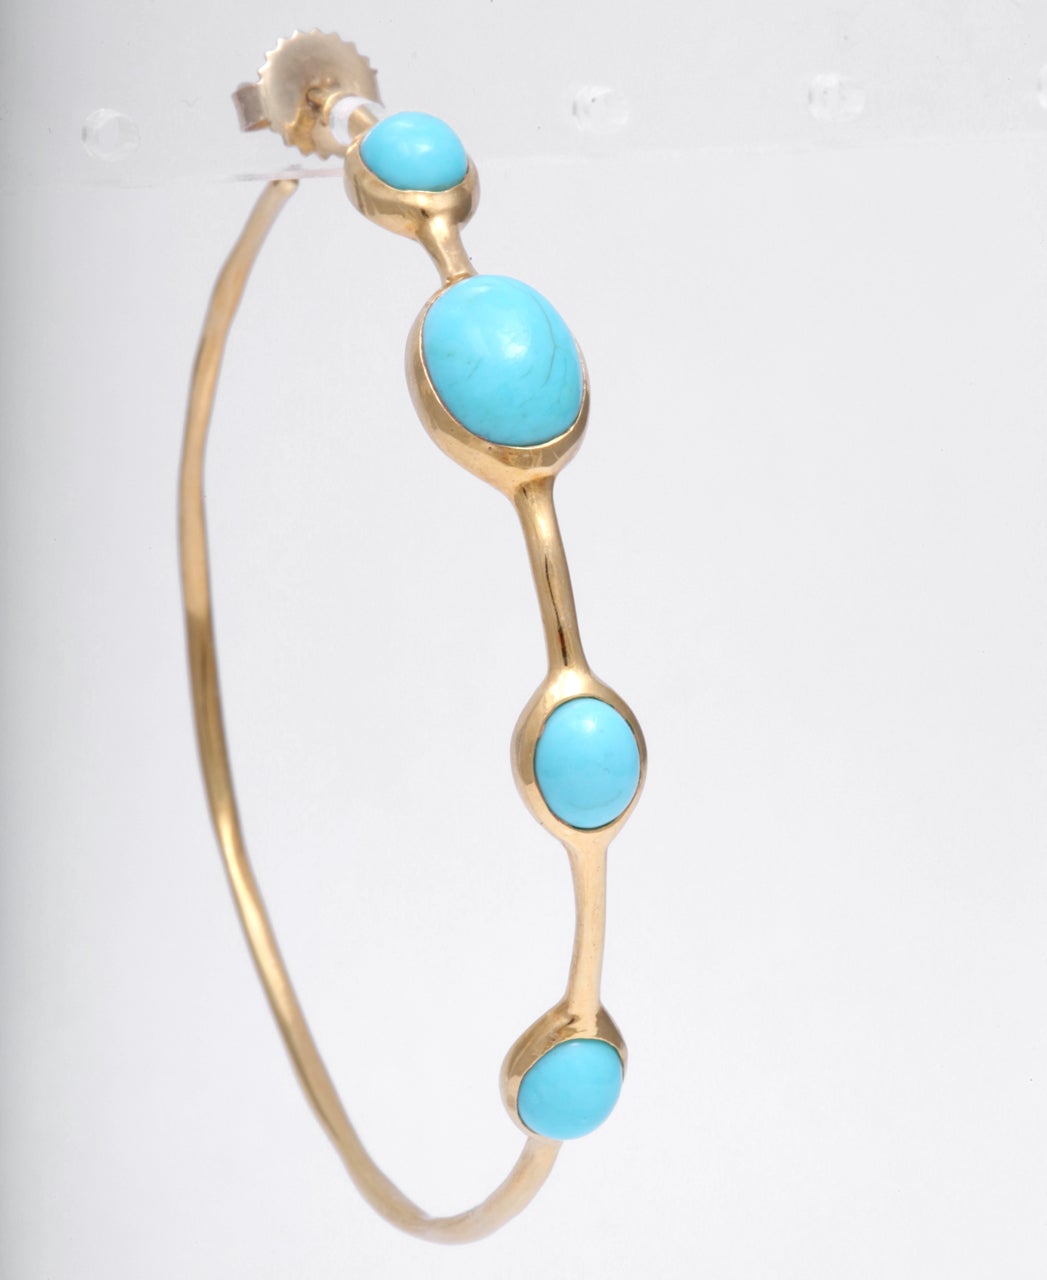 Signed Ippolita, these turquoise earrings are crafted in 18k yellow gold. Great summer accessory!